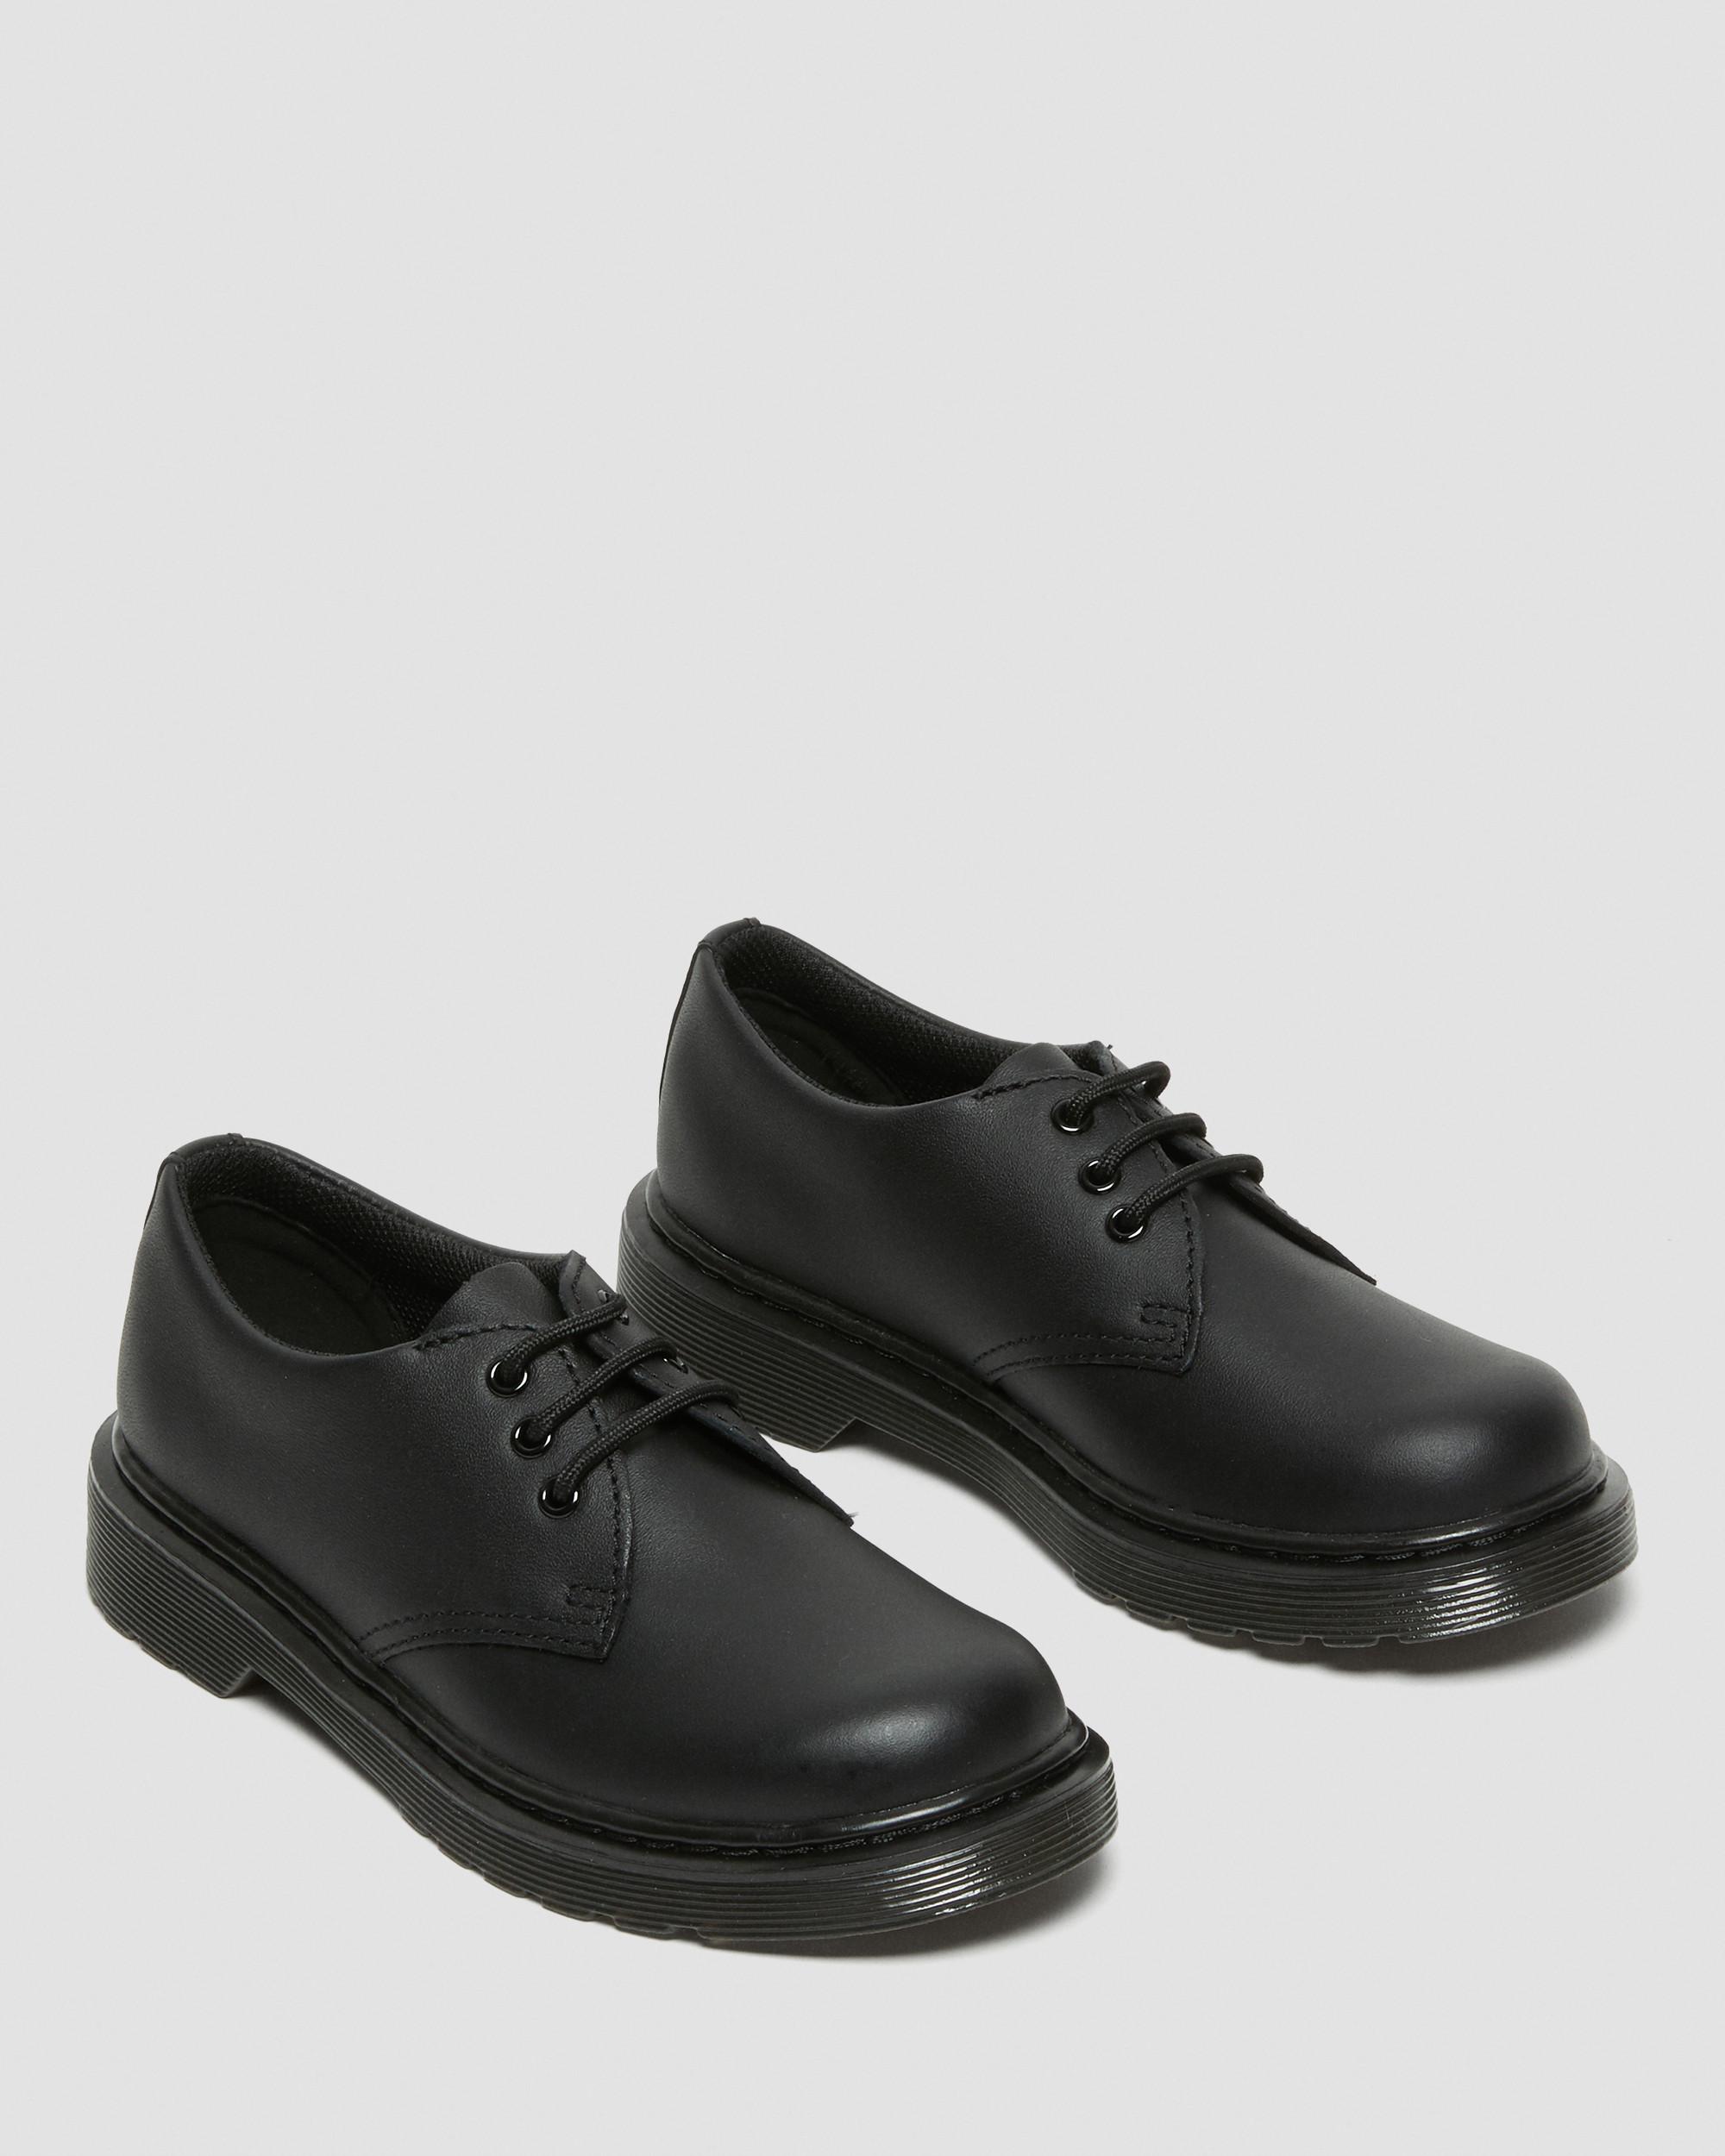 Junior 1461 Mono Softy T Leather Shoes in Black